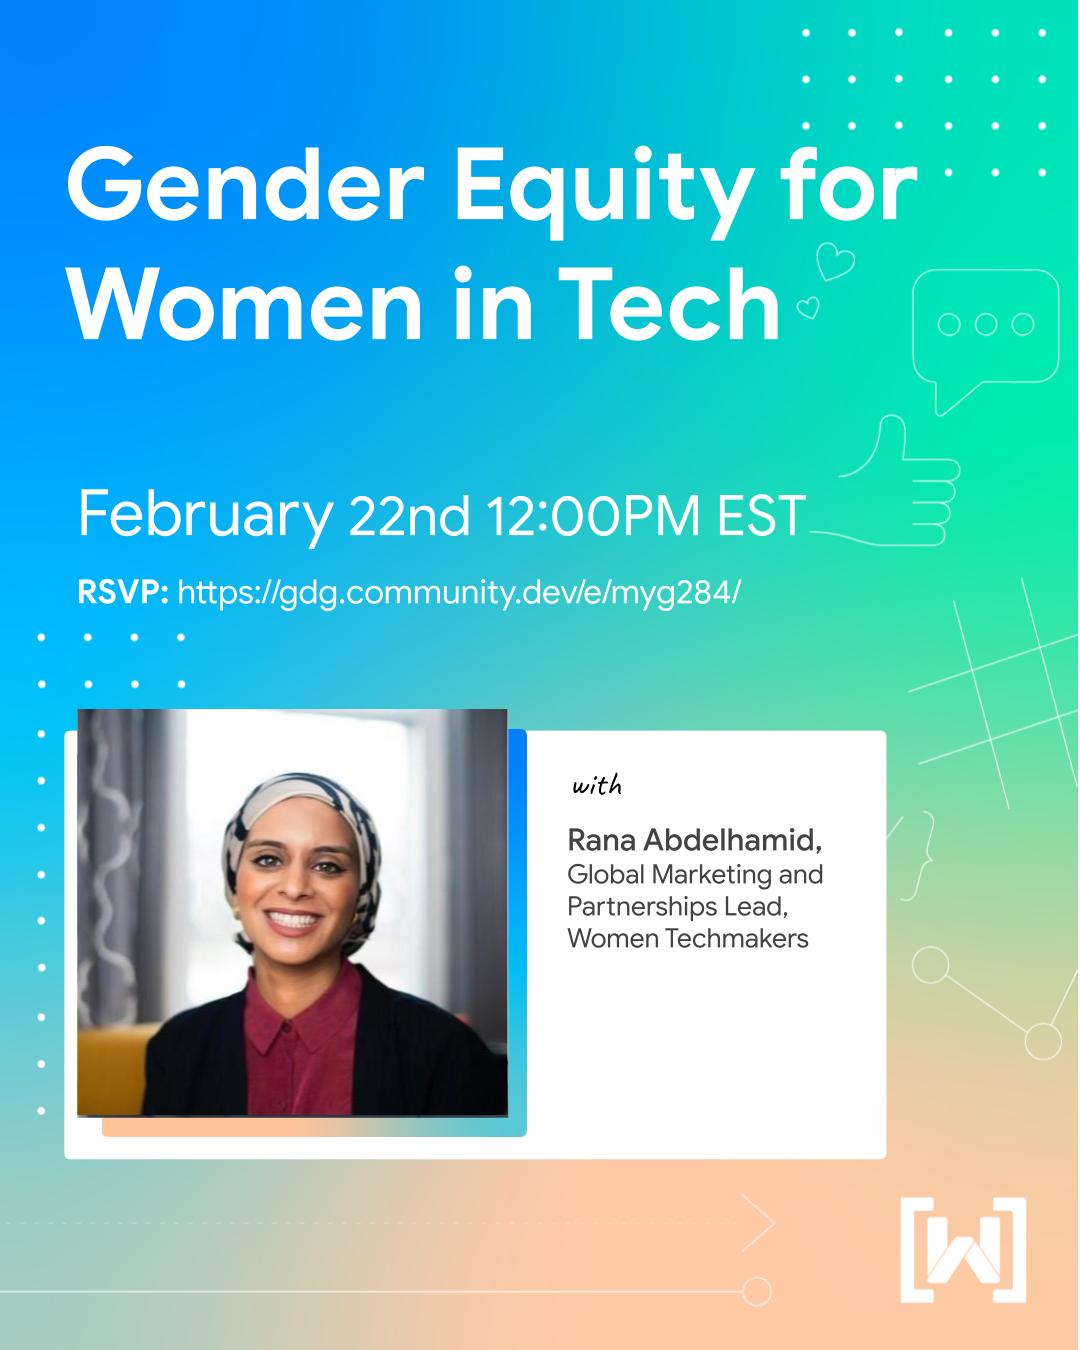 Flyer with the text 'Gender Equity for Women in Tech' and a photo of Rana Abdelhamid.